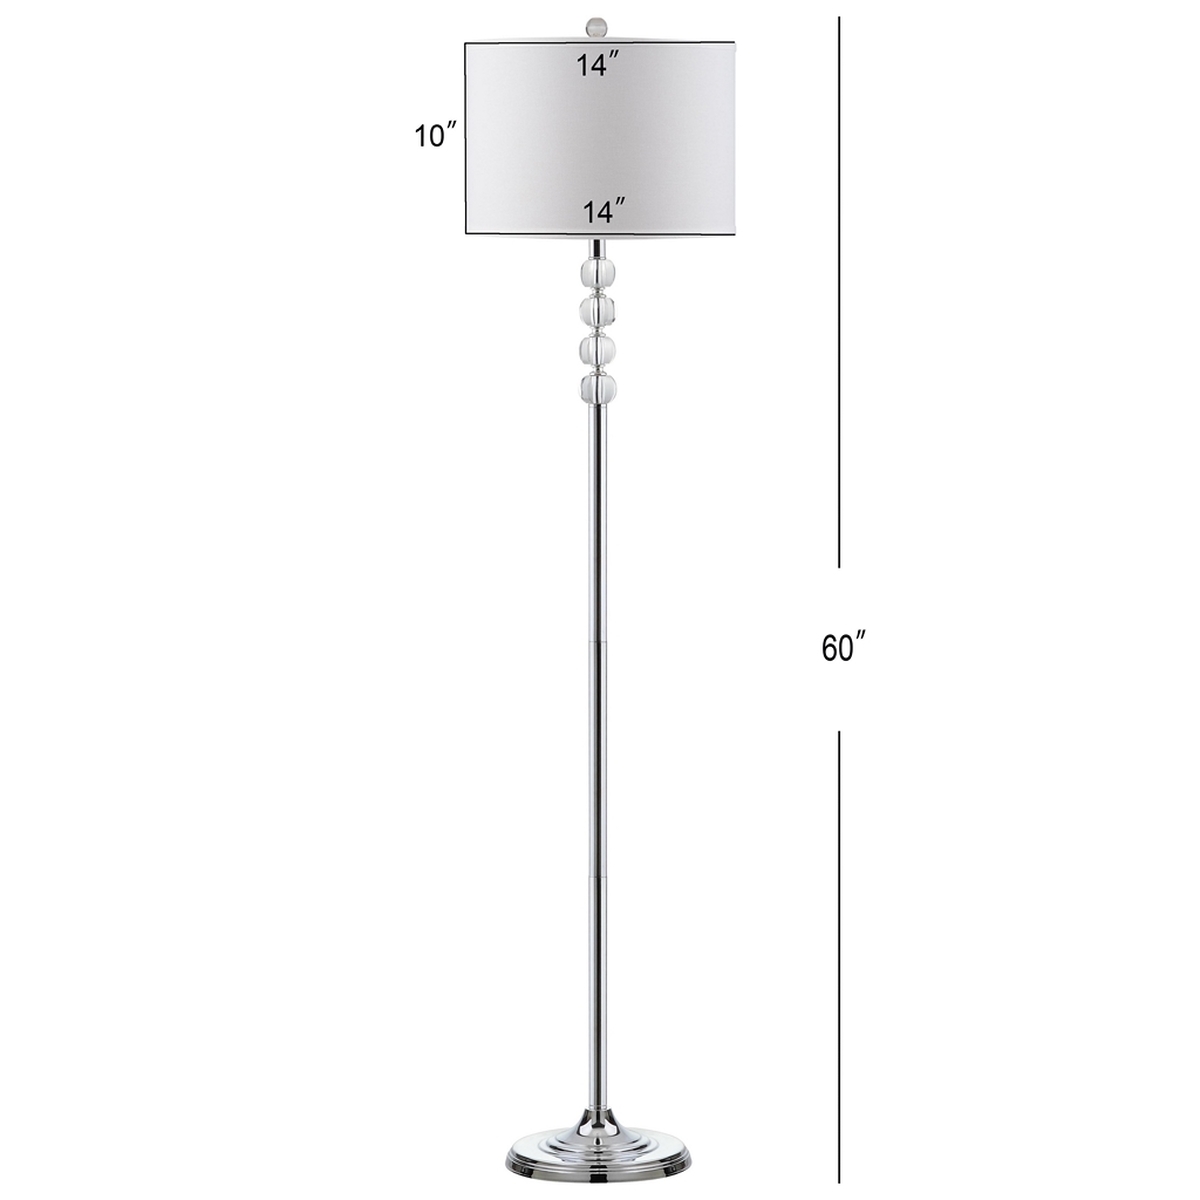 Vendome 60-Inch H Floor Lamp - Clear/Chrome - Arlo Home - Image 4